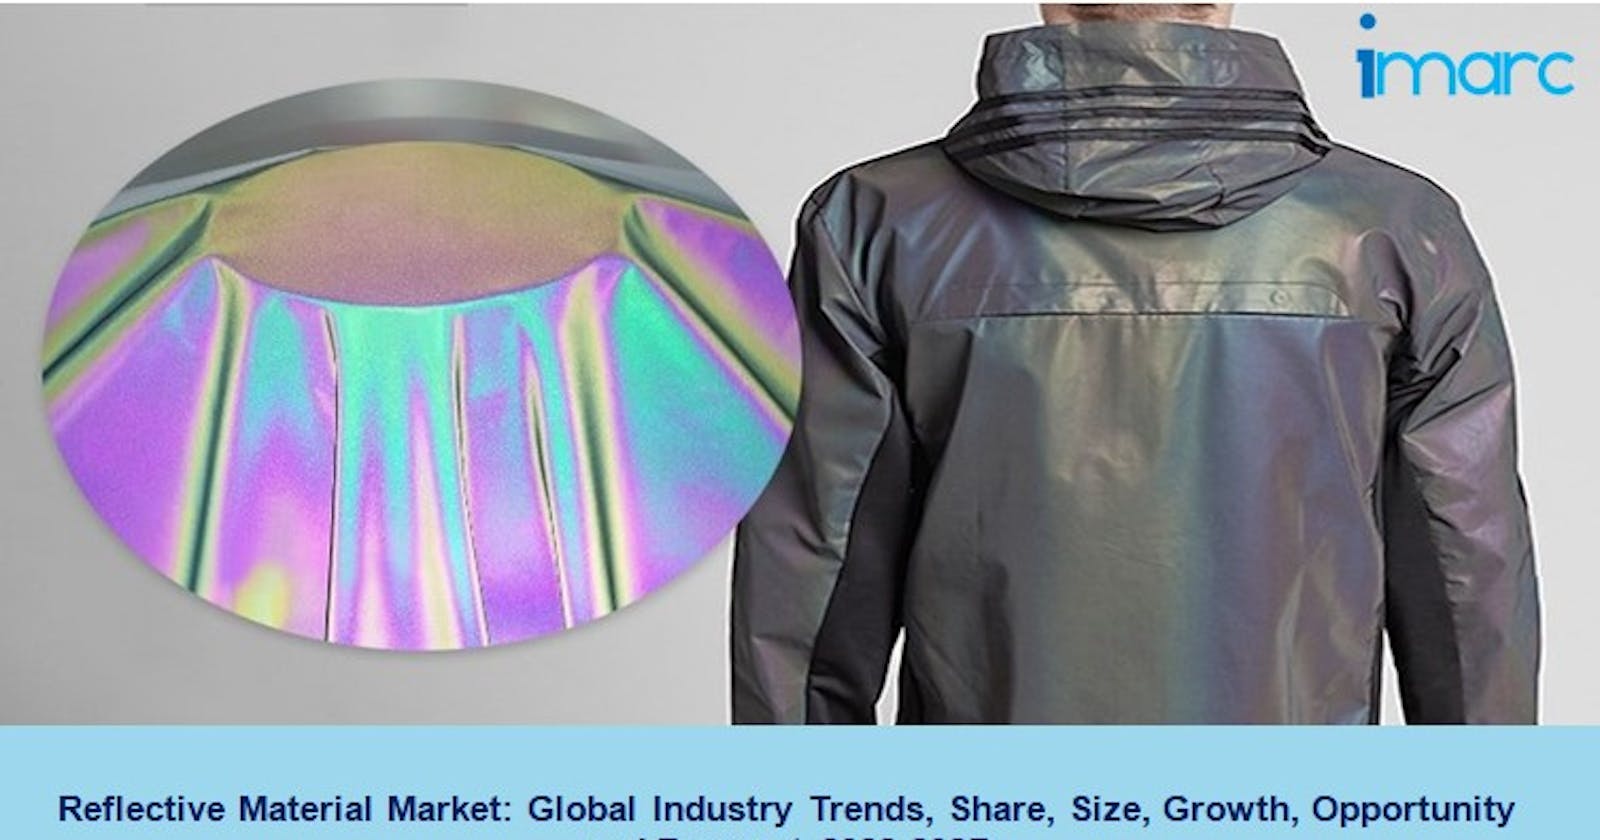 Reflective Material Market 2022, Share, Size, Analysis and Growth Report 2027